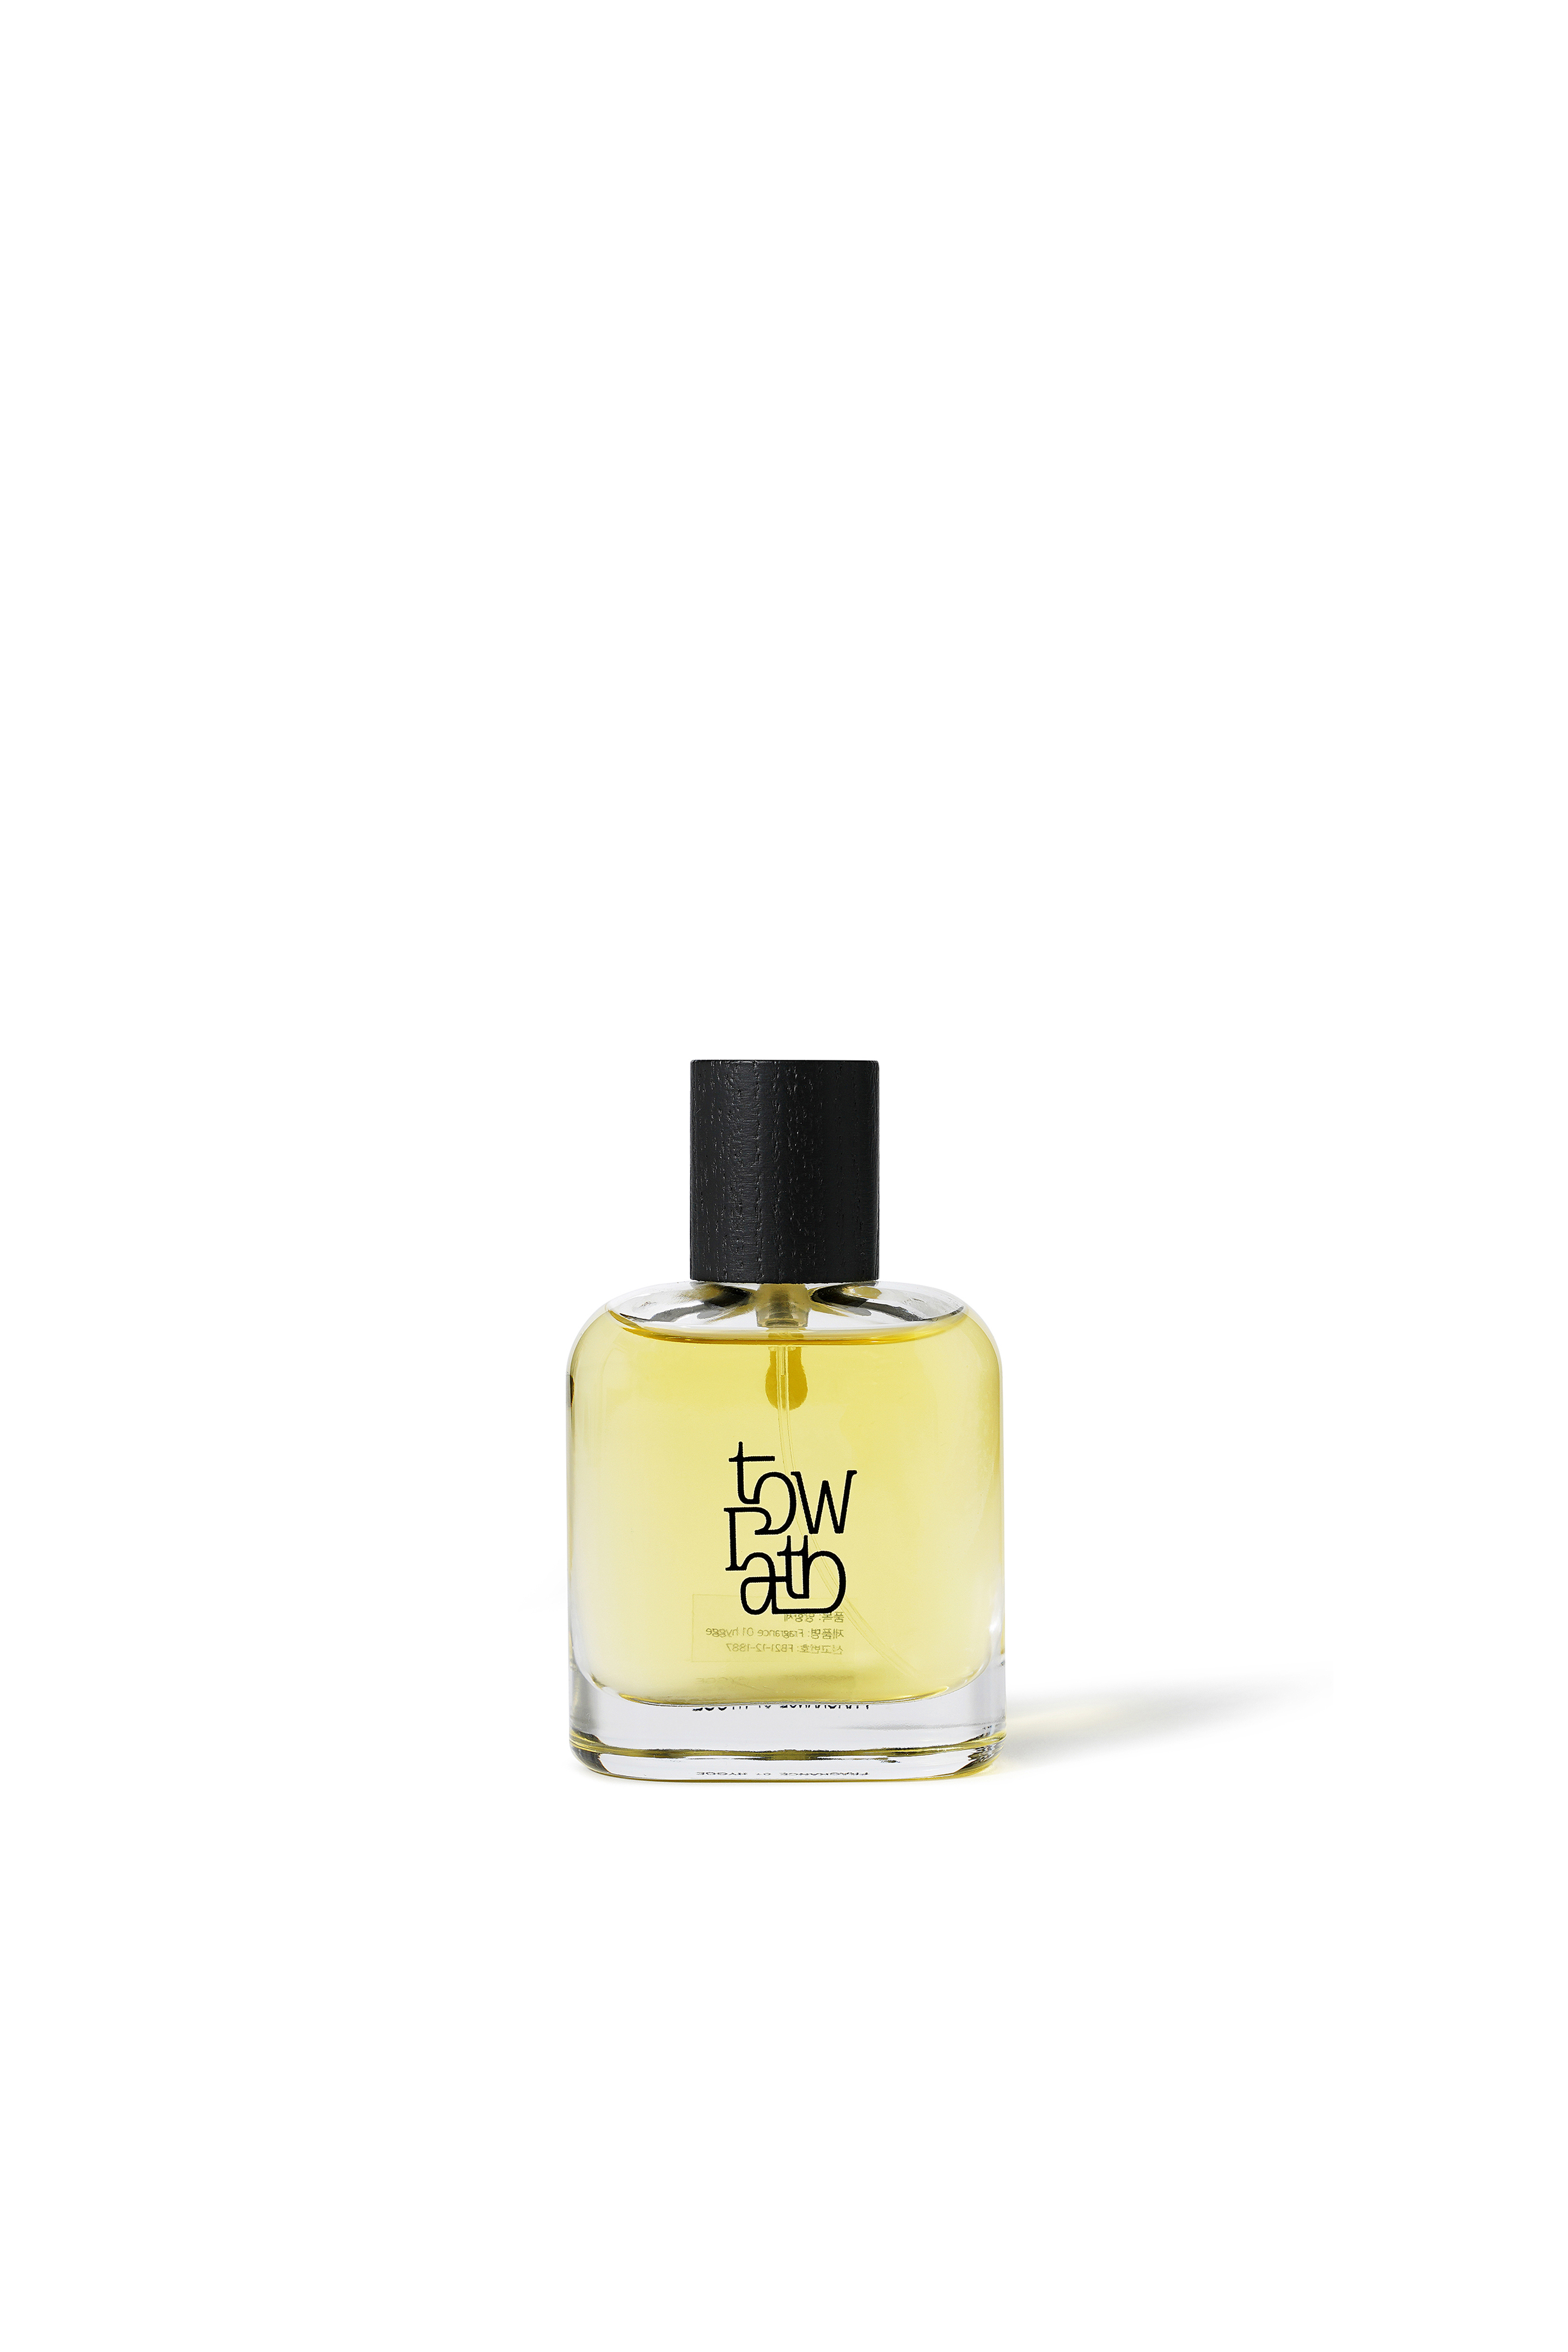 Towpath 001 Fragrance 01 Hygge